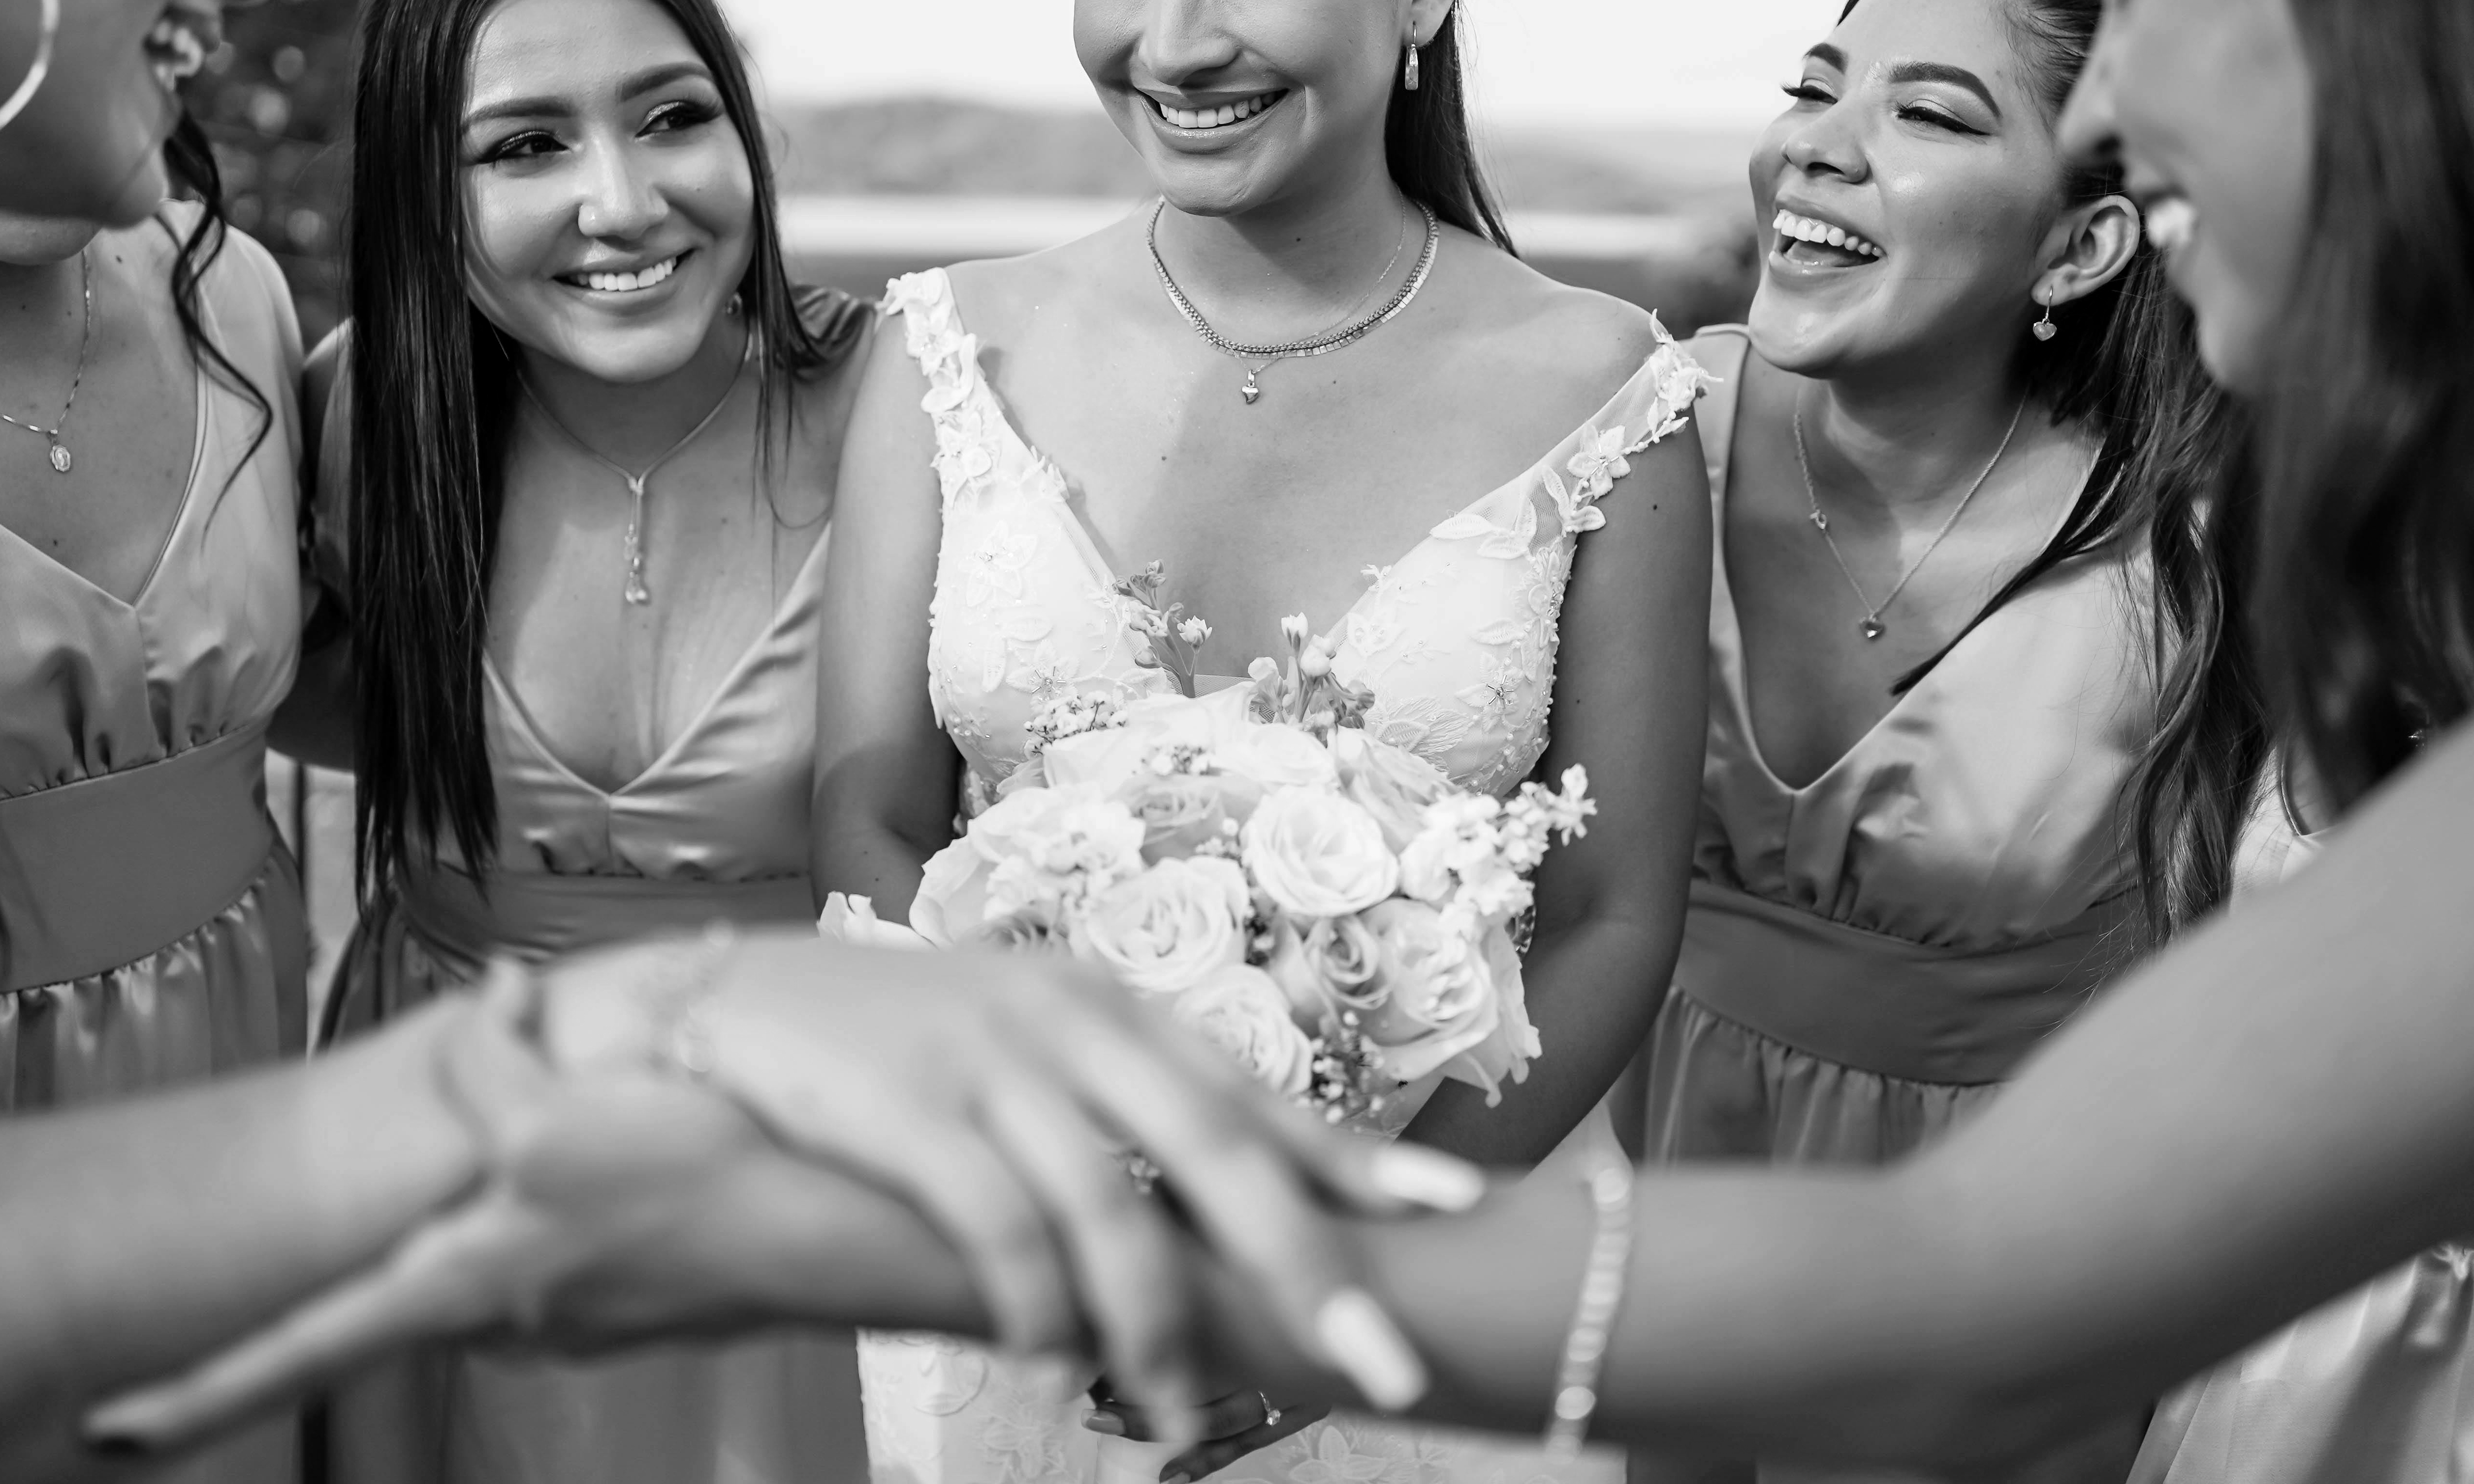 Emily gathering her bridesmaids for a group photo | Source: Pexels